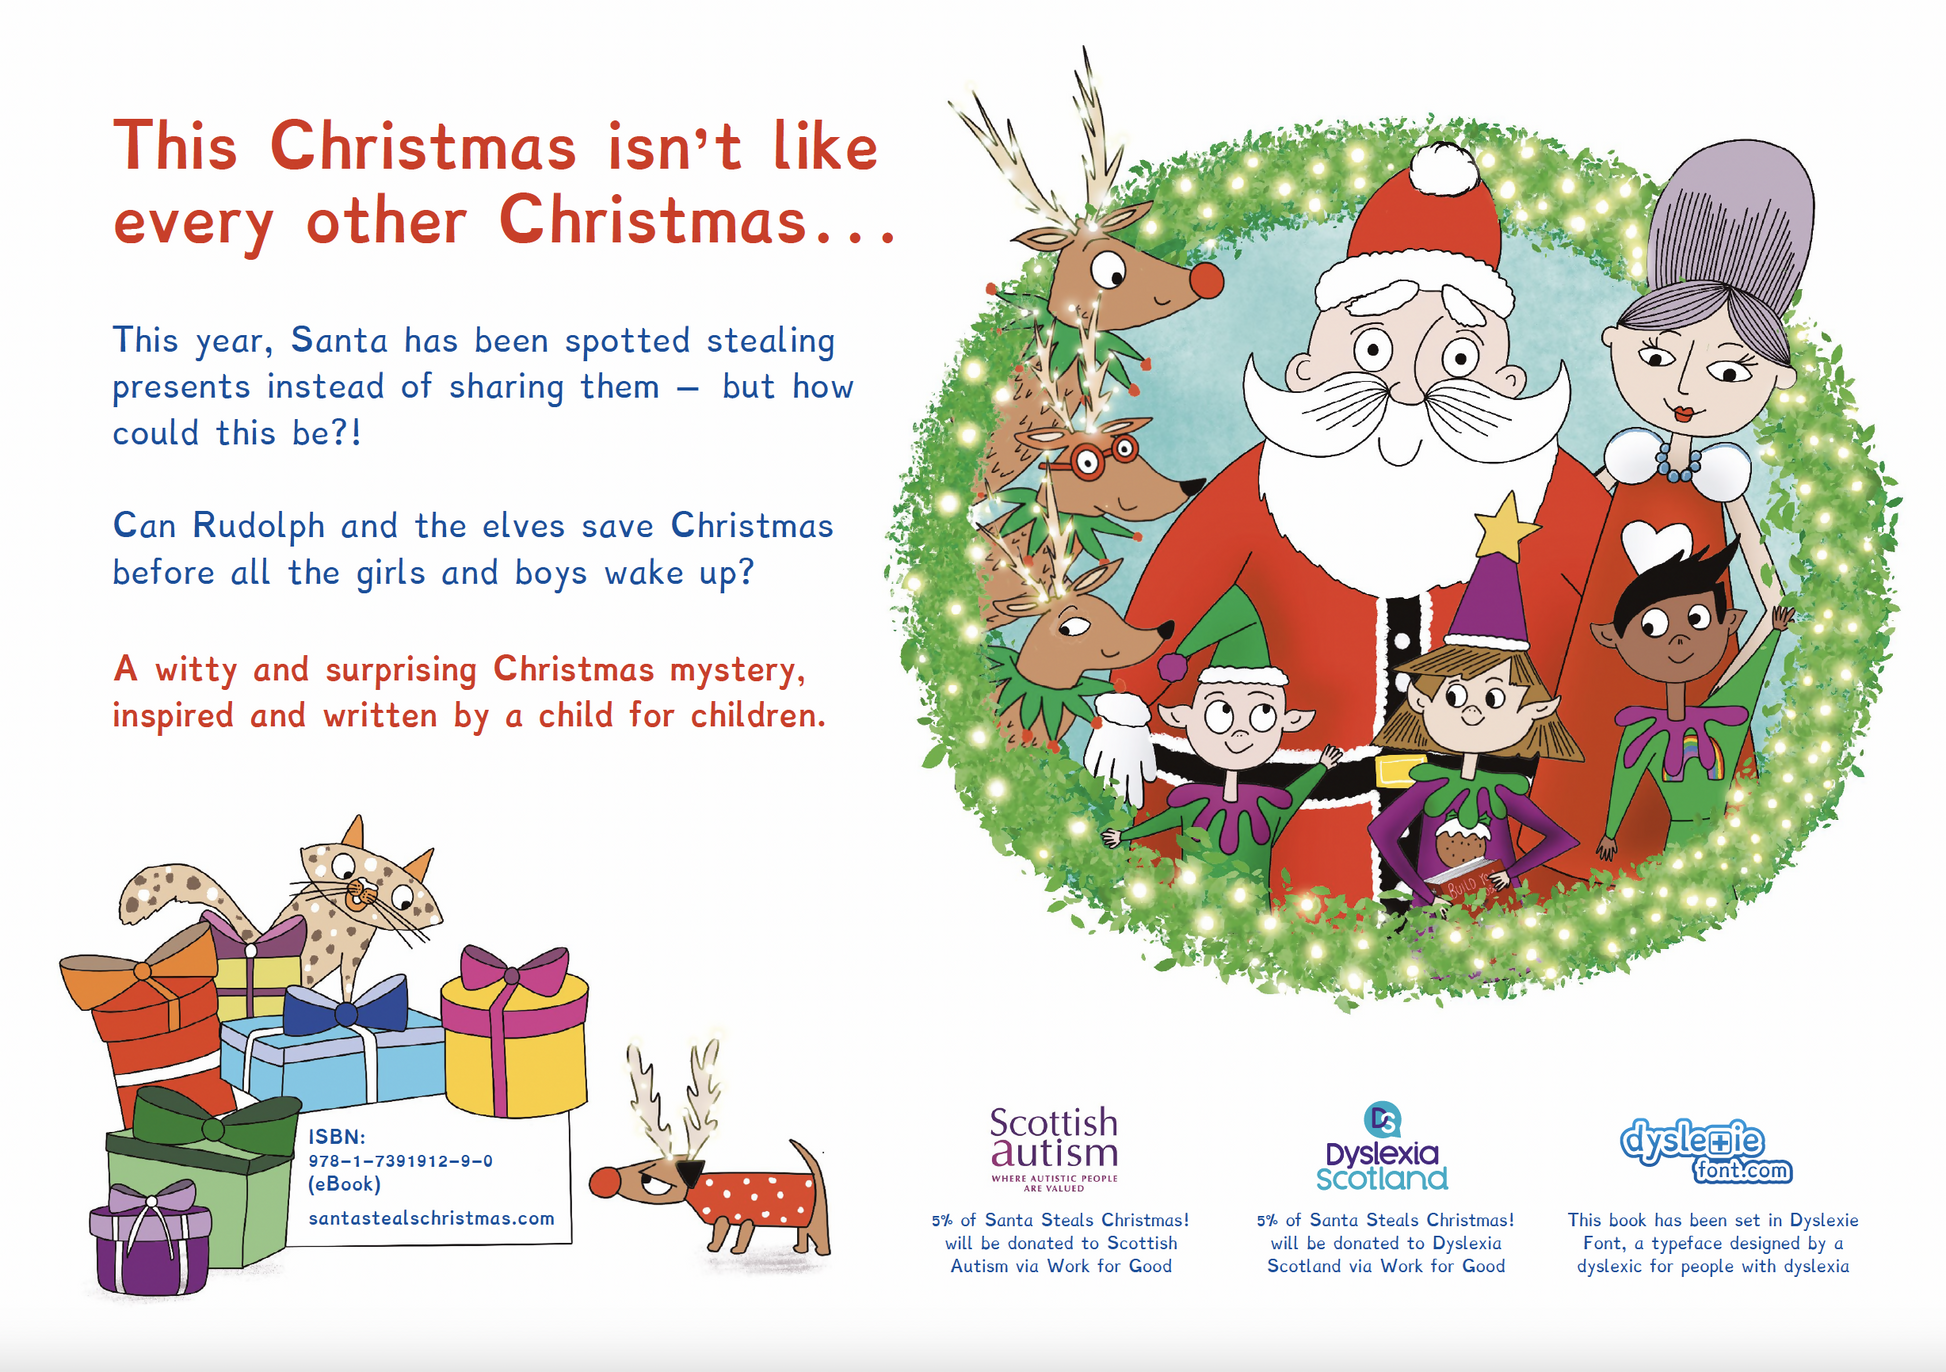 Back cover of the book with Mr & Mrs Claus, reindeers, elves and their pet cats and dog. 5% donated to Scottish Autism and Dyslexia Scotland. Text: This Christmas isn’t like every other Christmas. . . This year, Santa has been spotted stealing presents instead of sharing them – but how could this be?! Can Rudolph and the elves save Christmas before all the girls and boys wake up? A witty and surprising Christmas mystery.